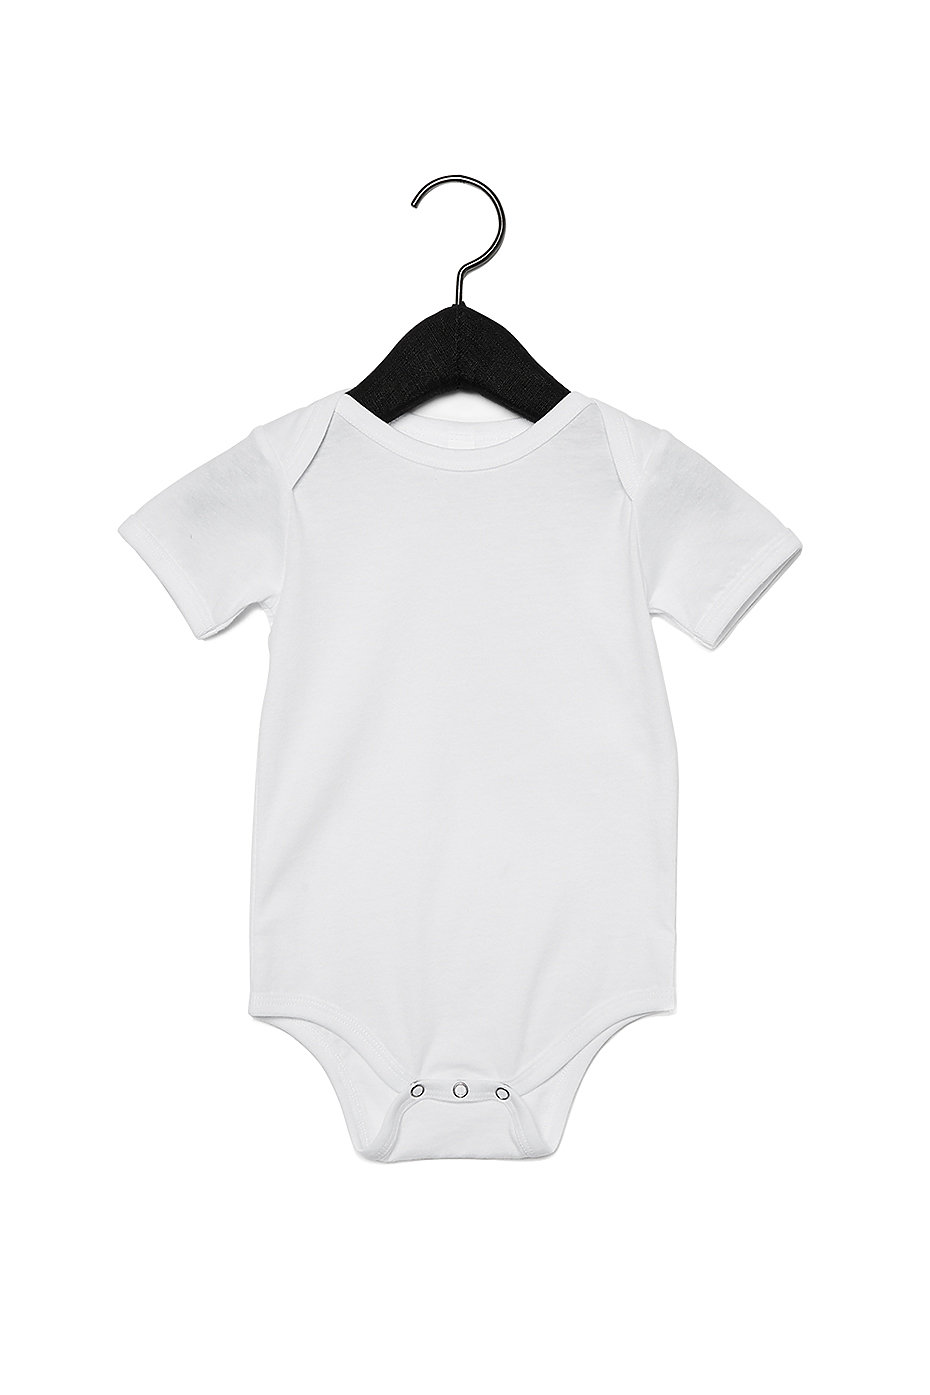 100% Cotton & Short Sleeve Details about   EVAN Baby Bodysuit in Photo of Sign